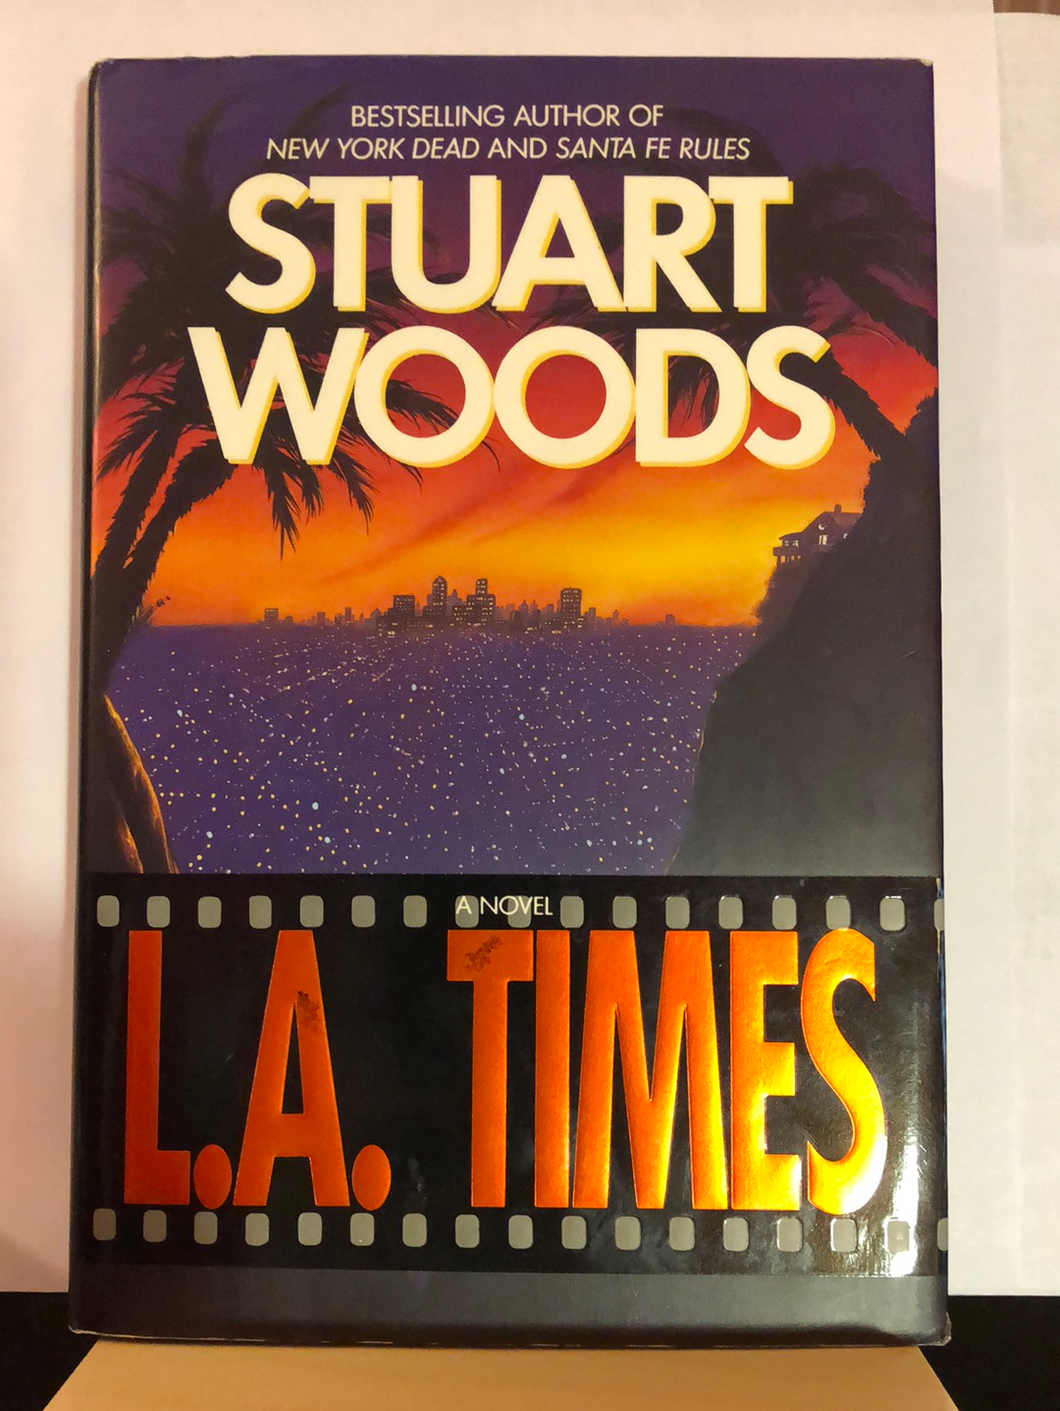 L.A. Times   by Stuart Woods   Hardcover